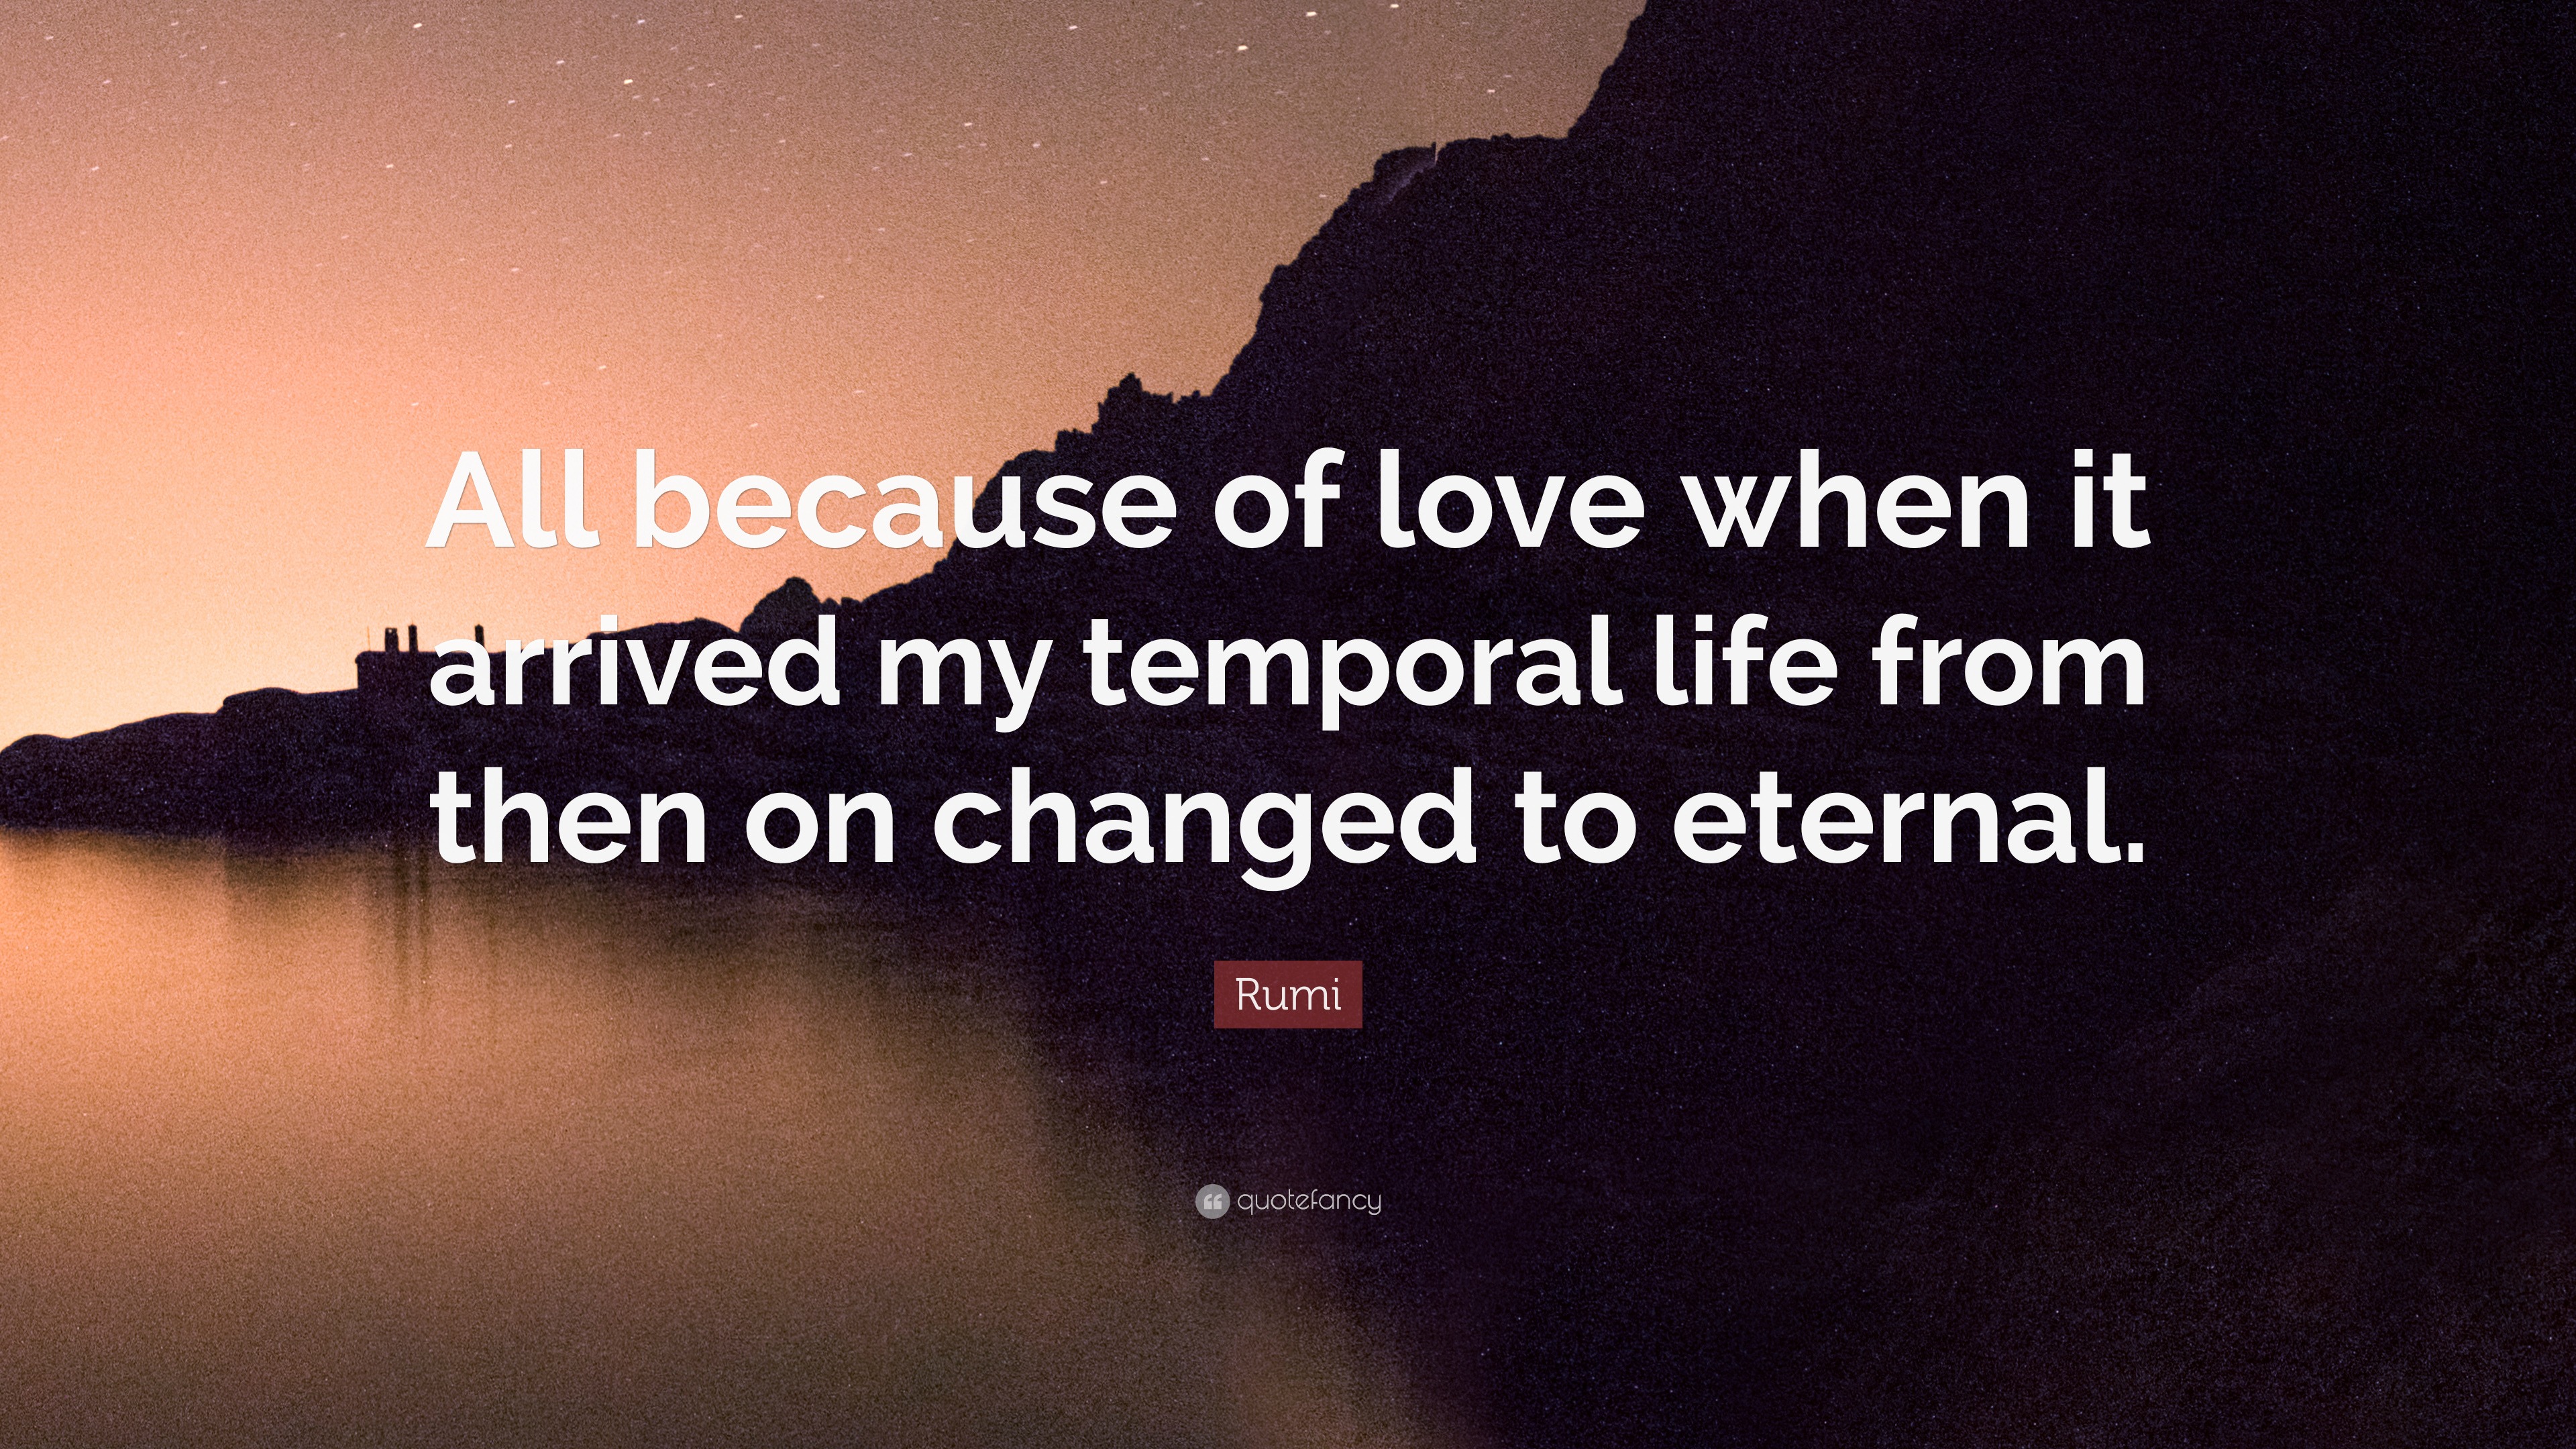 Rumi Quote “All because of love when it arrived my temporal life from then